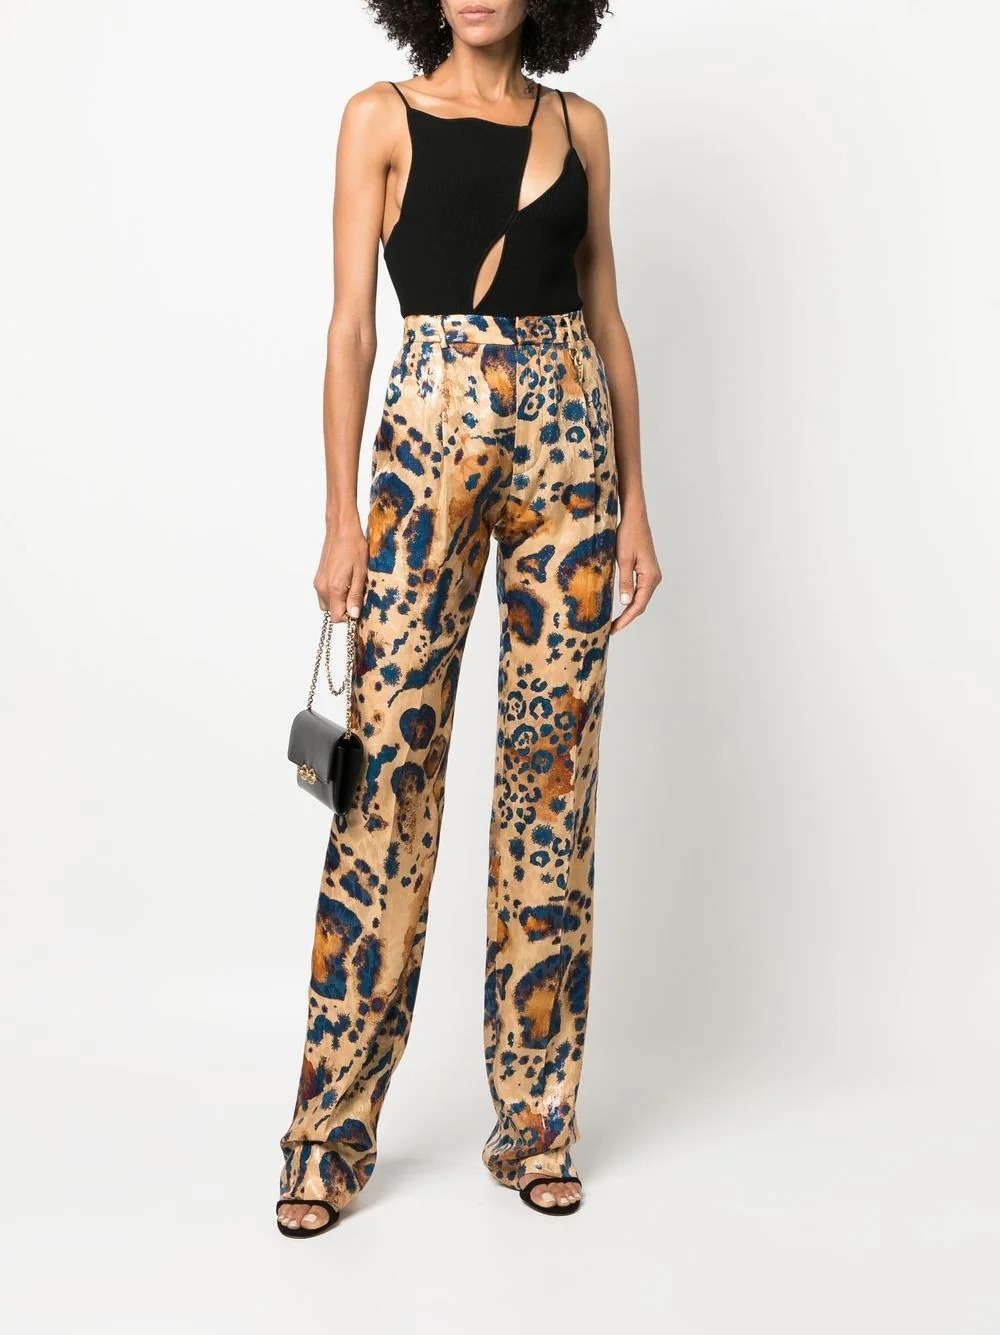 KIDS ONLY Blue Animal Print Flared Trousers | New Look